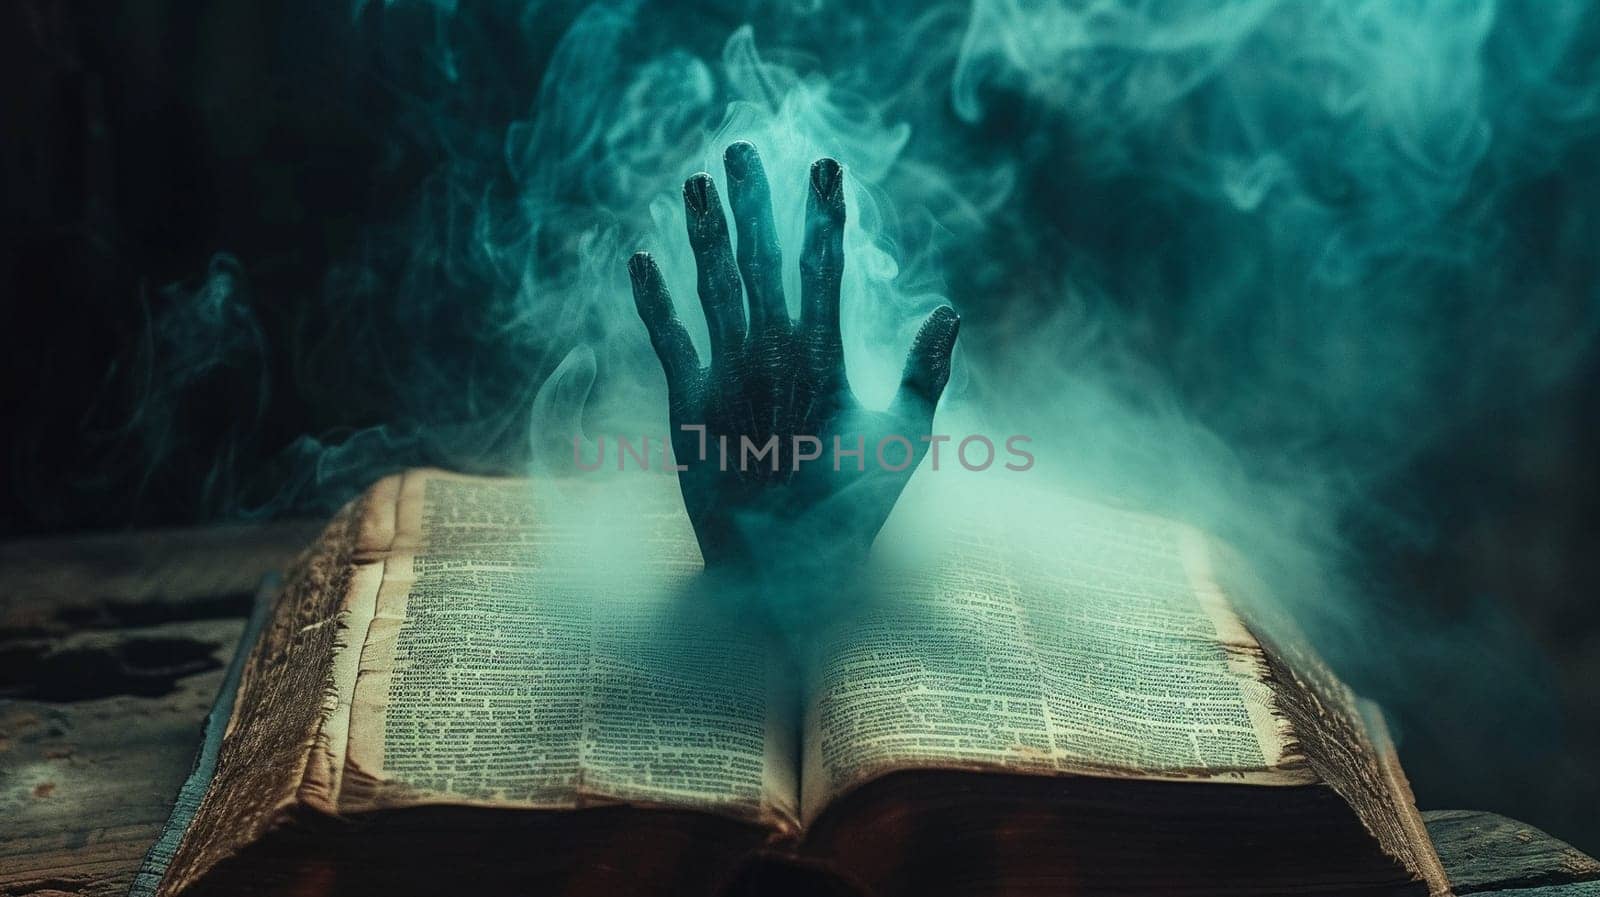 An ancient magic book with spirits. A scary and mysterious old book. High quality illustration